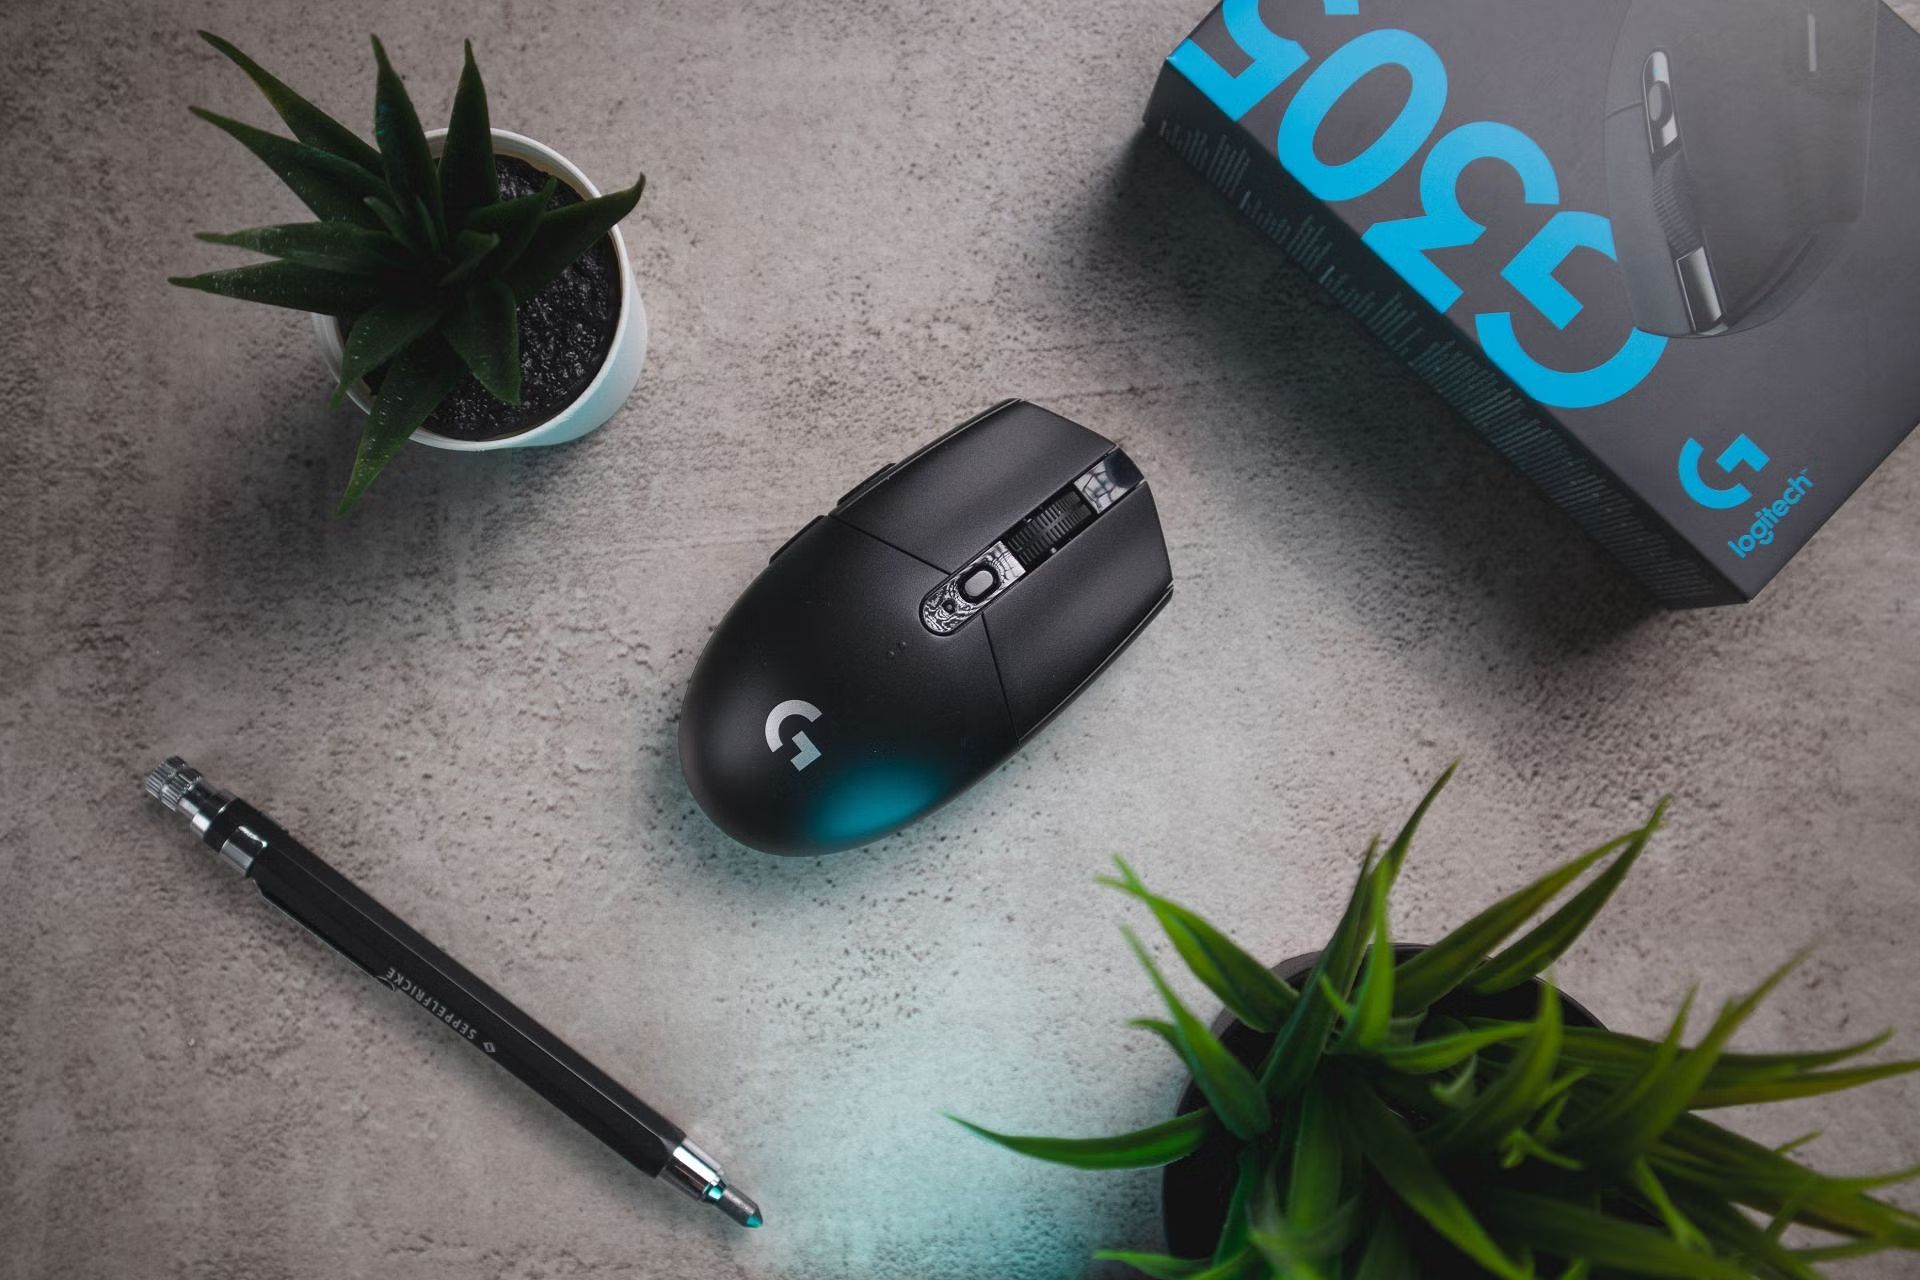 How To Access Programs With Logitech Gaming Mouse